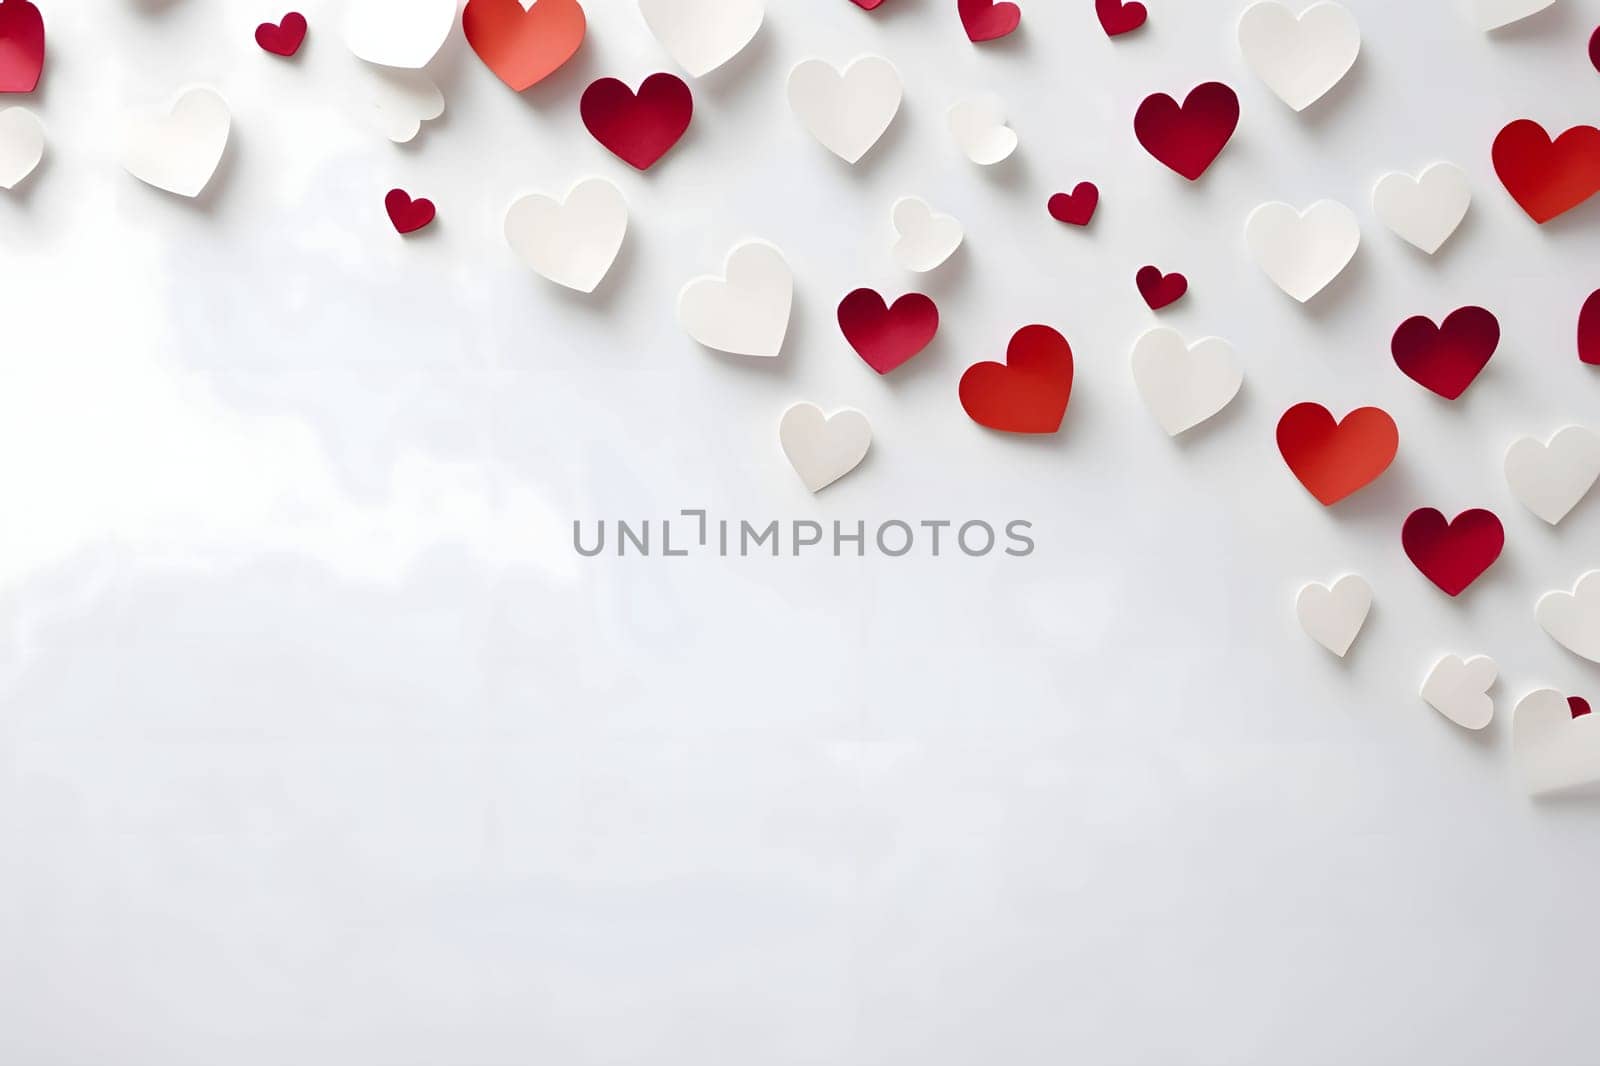 White and red hearts on a blank light card, banner with space for your own content. Heart as a symbol of affection and love. The time of falling in love and love.